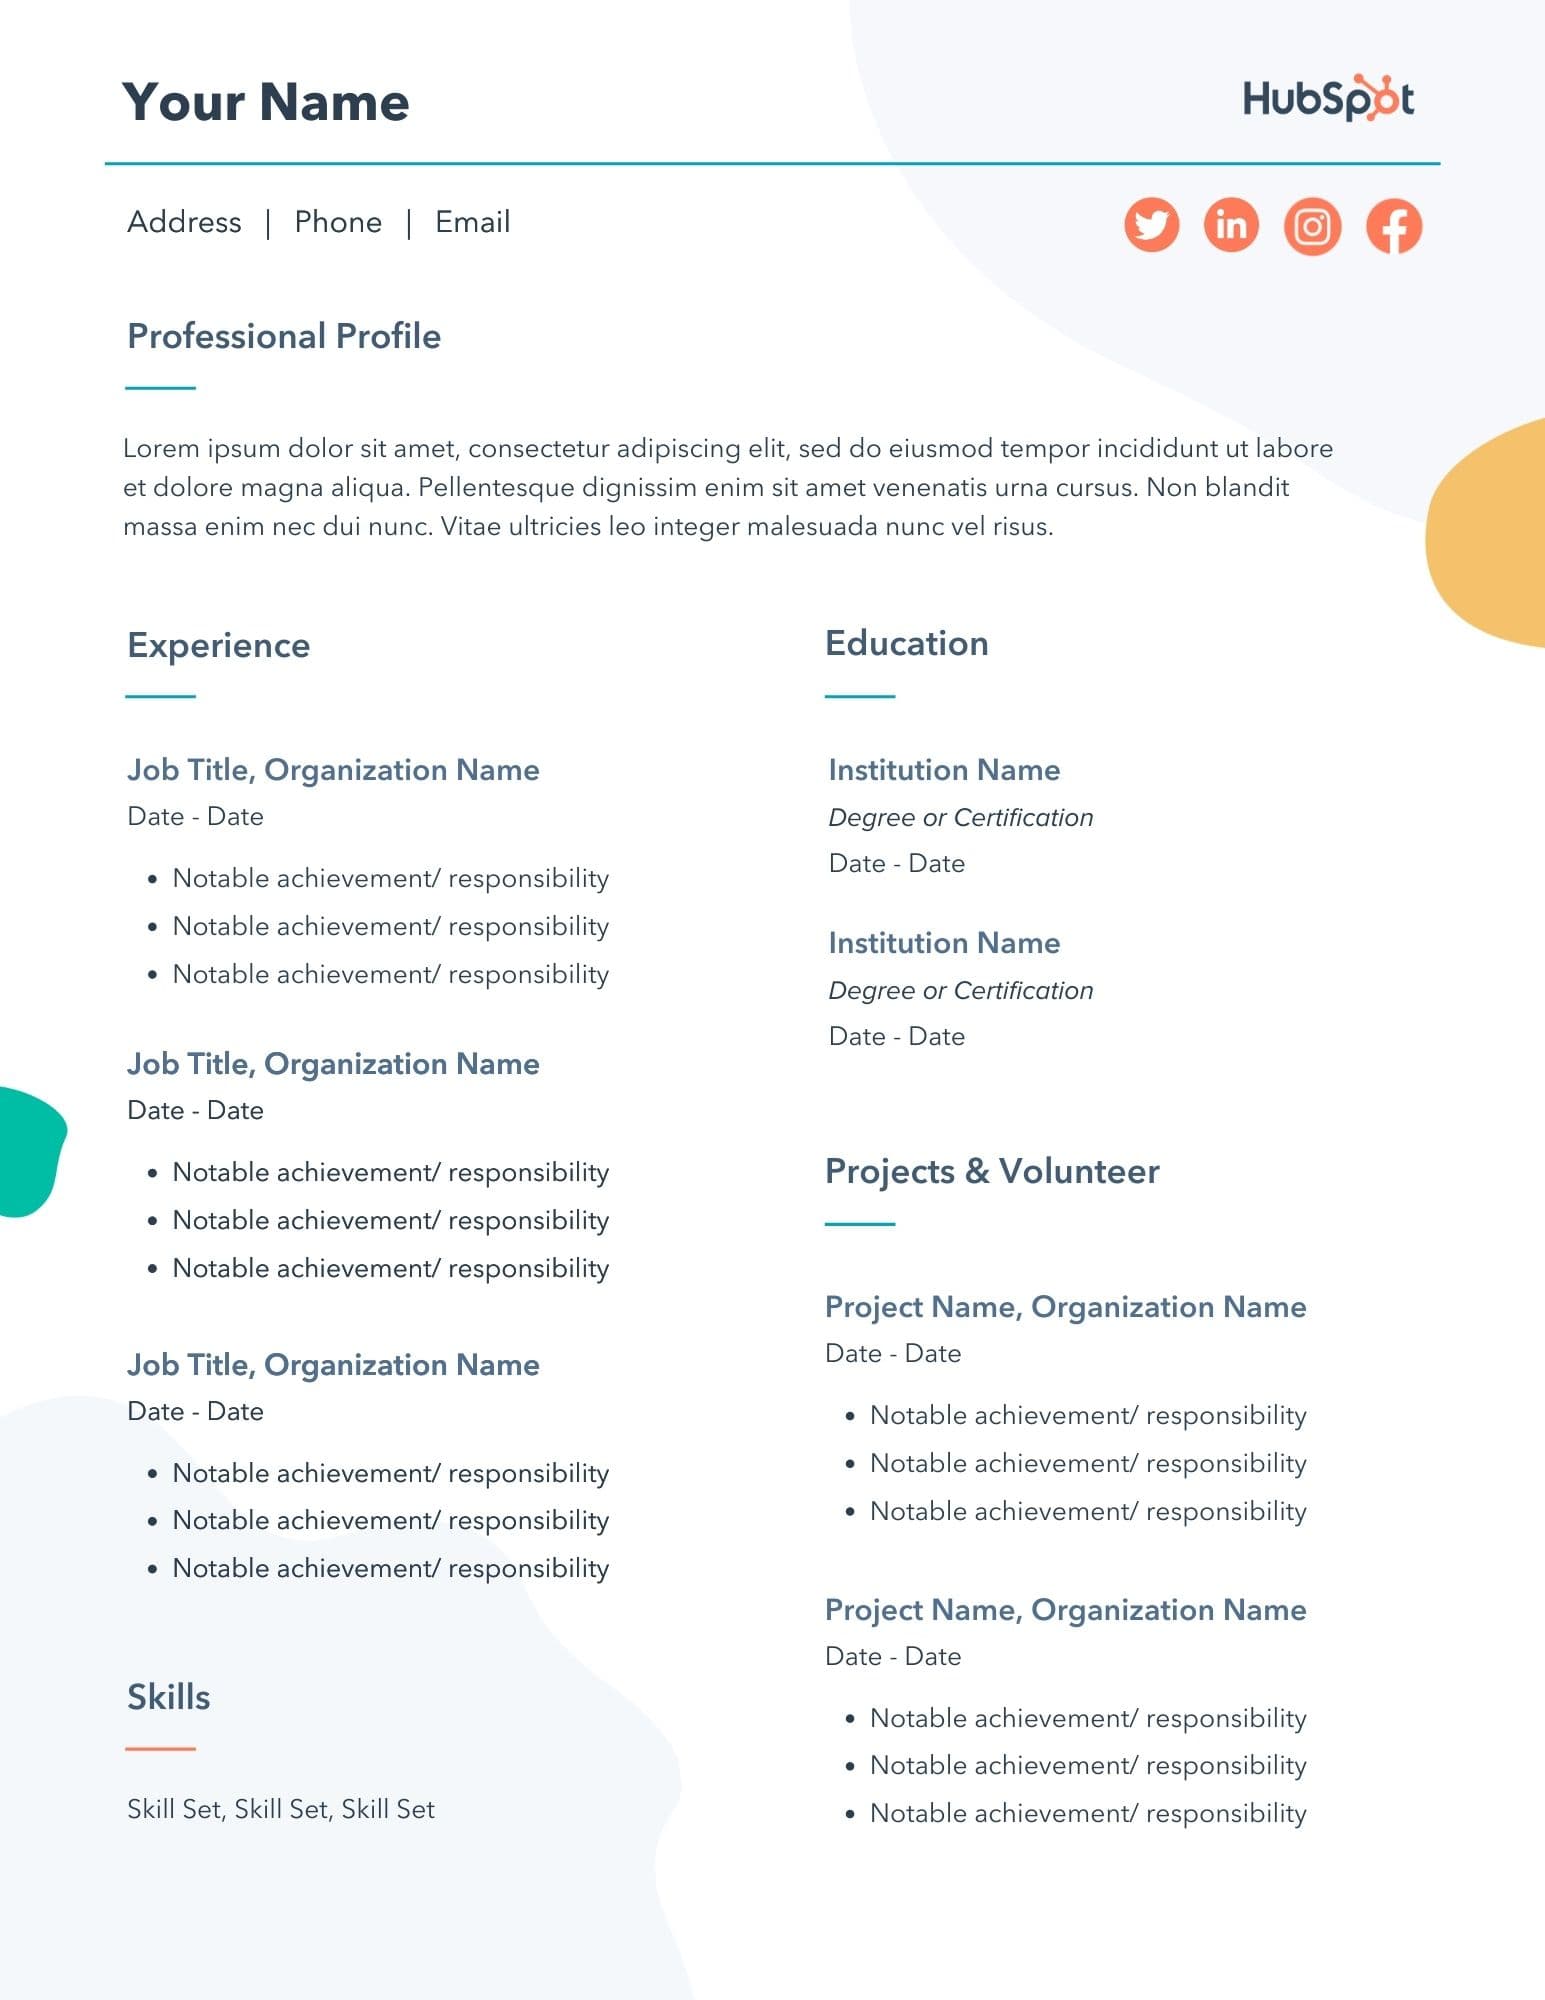 Resume Template for Word Professional Resume Instant Download CV Resume and Cover Letter and References Simple Resume with Social Icons